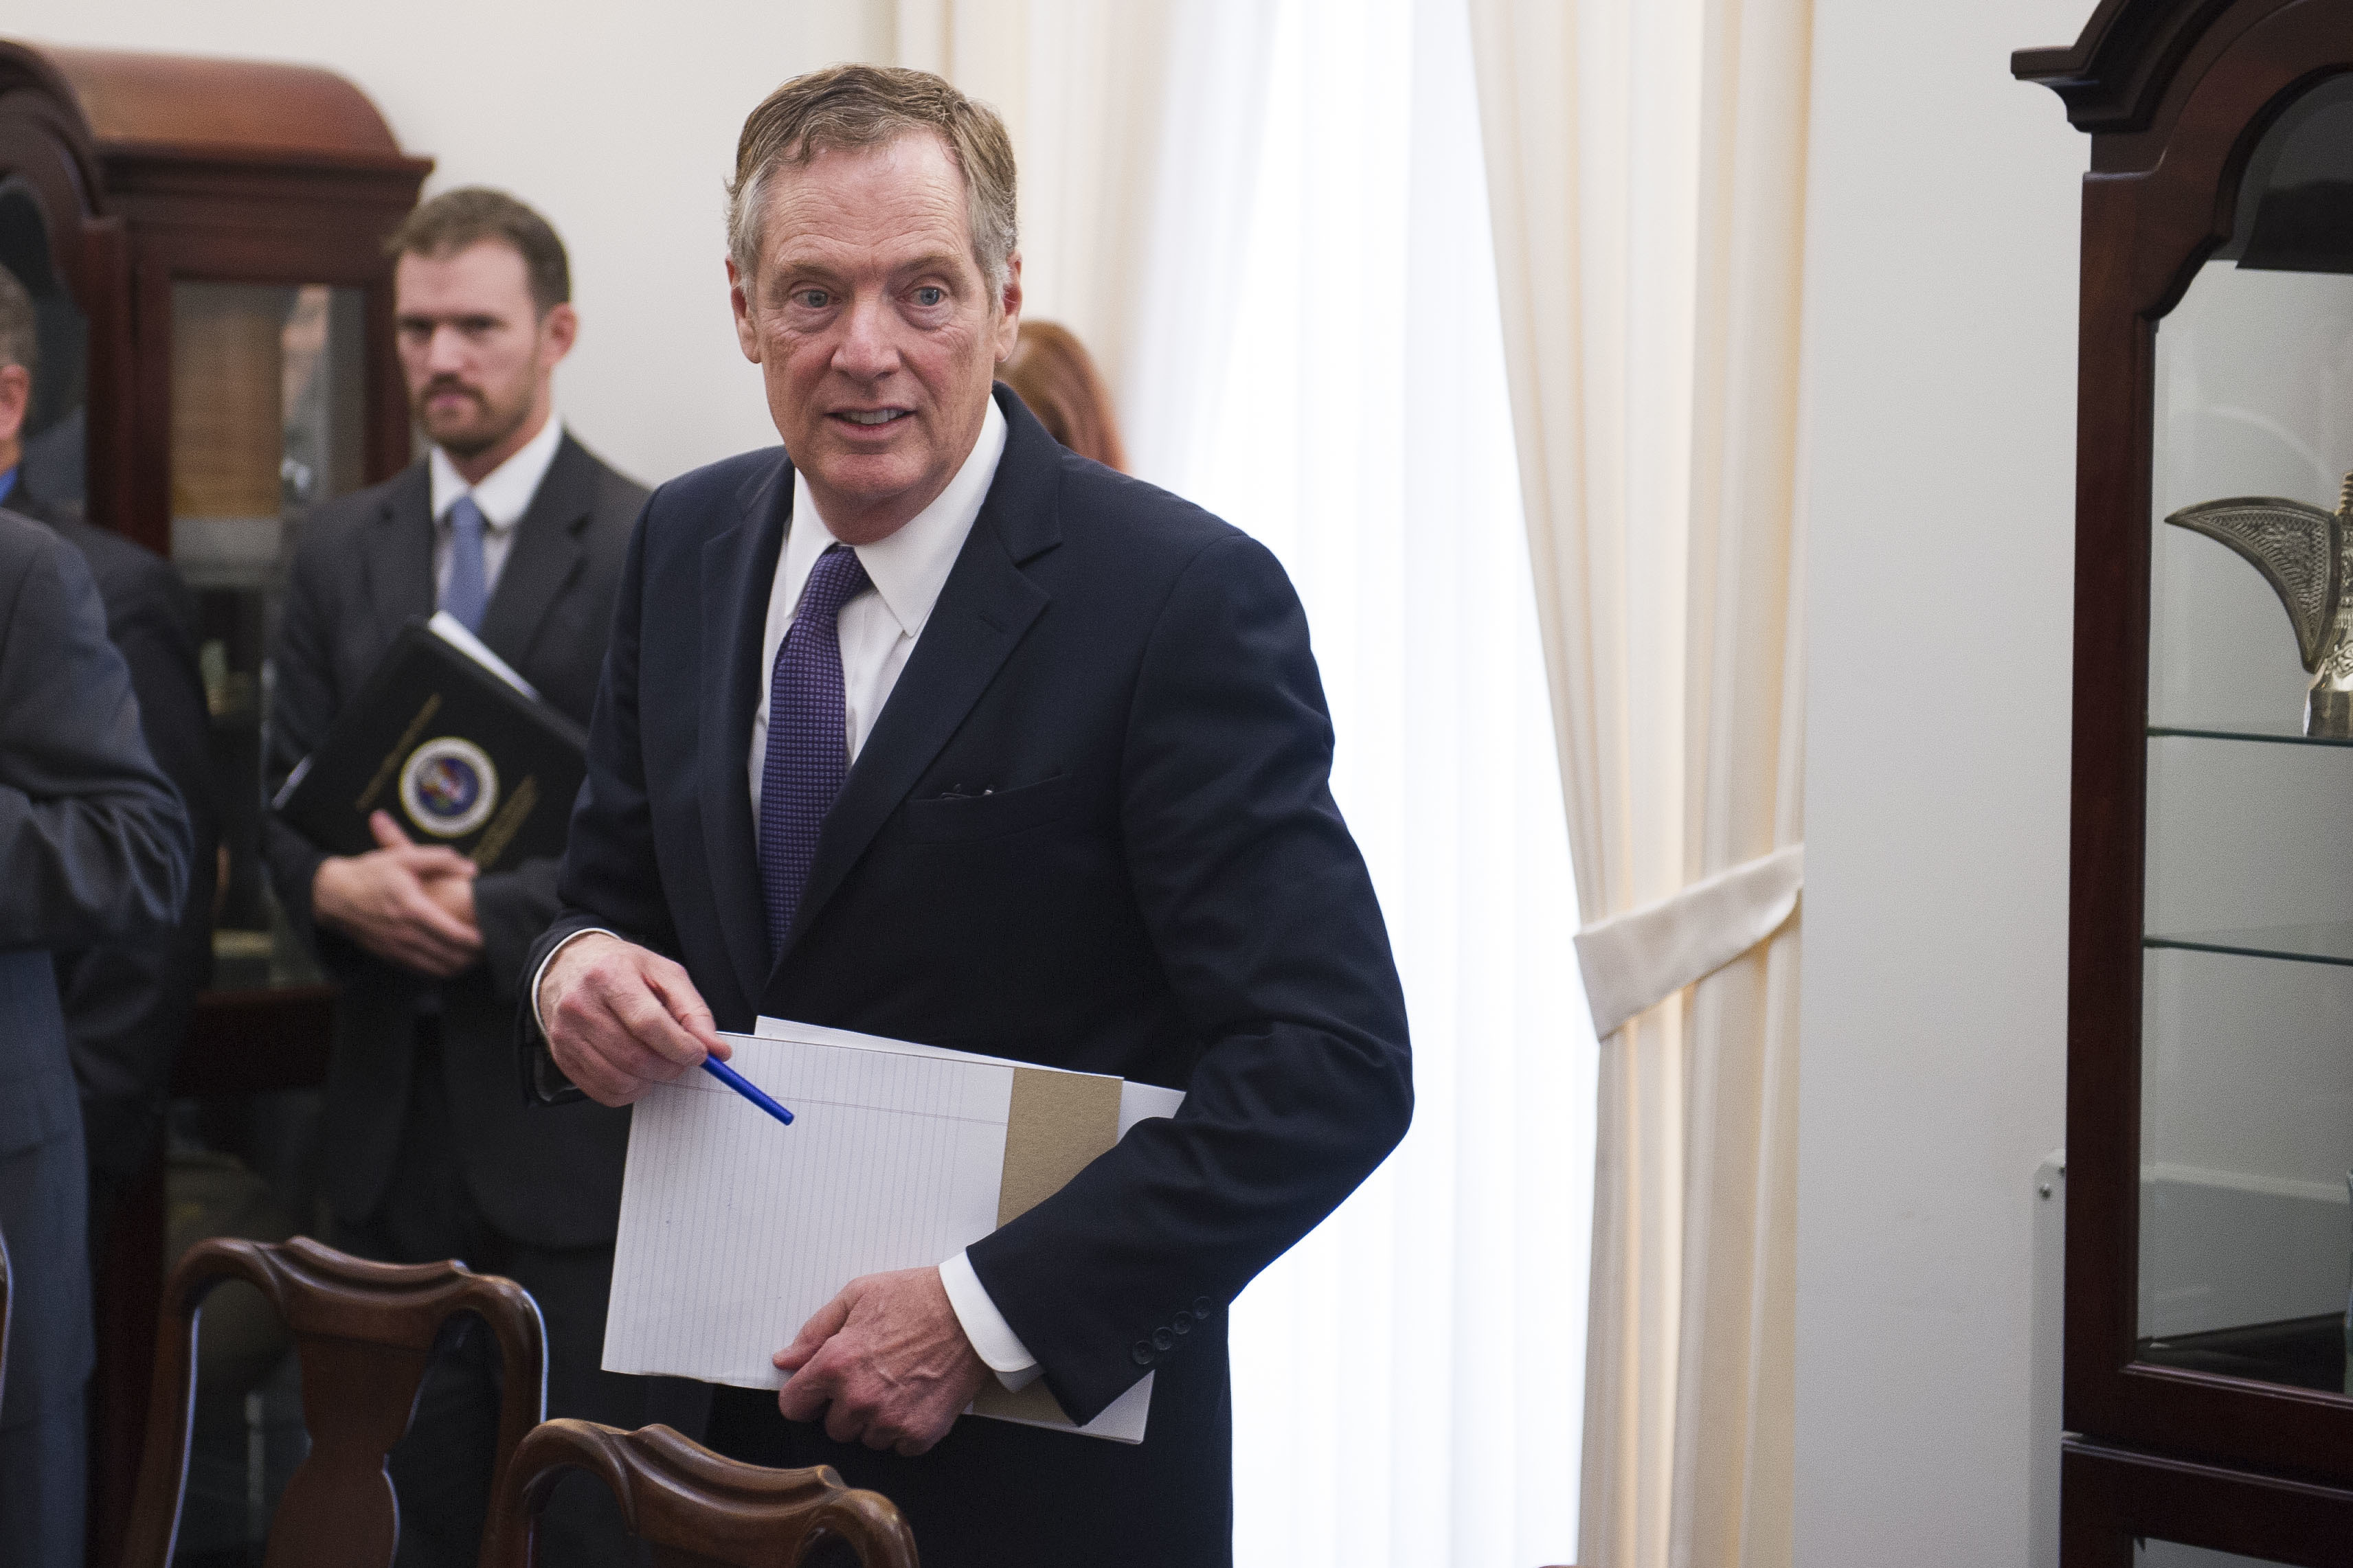 Robert Lighthizer, U.S. trade rep: Ford's China move 'very troubling'